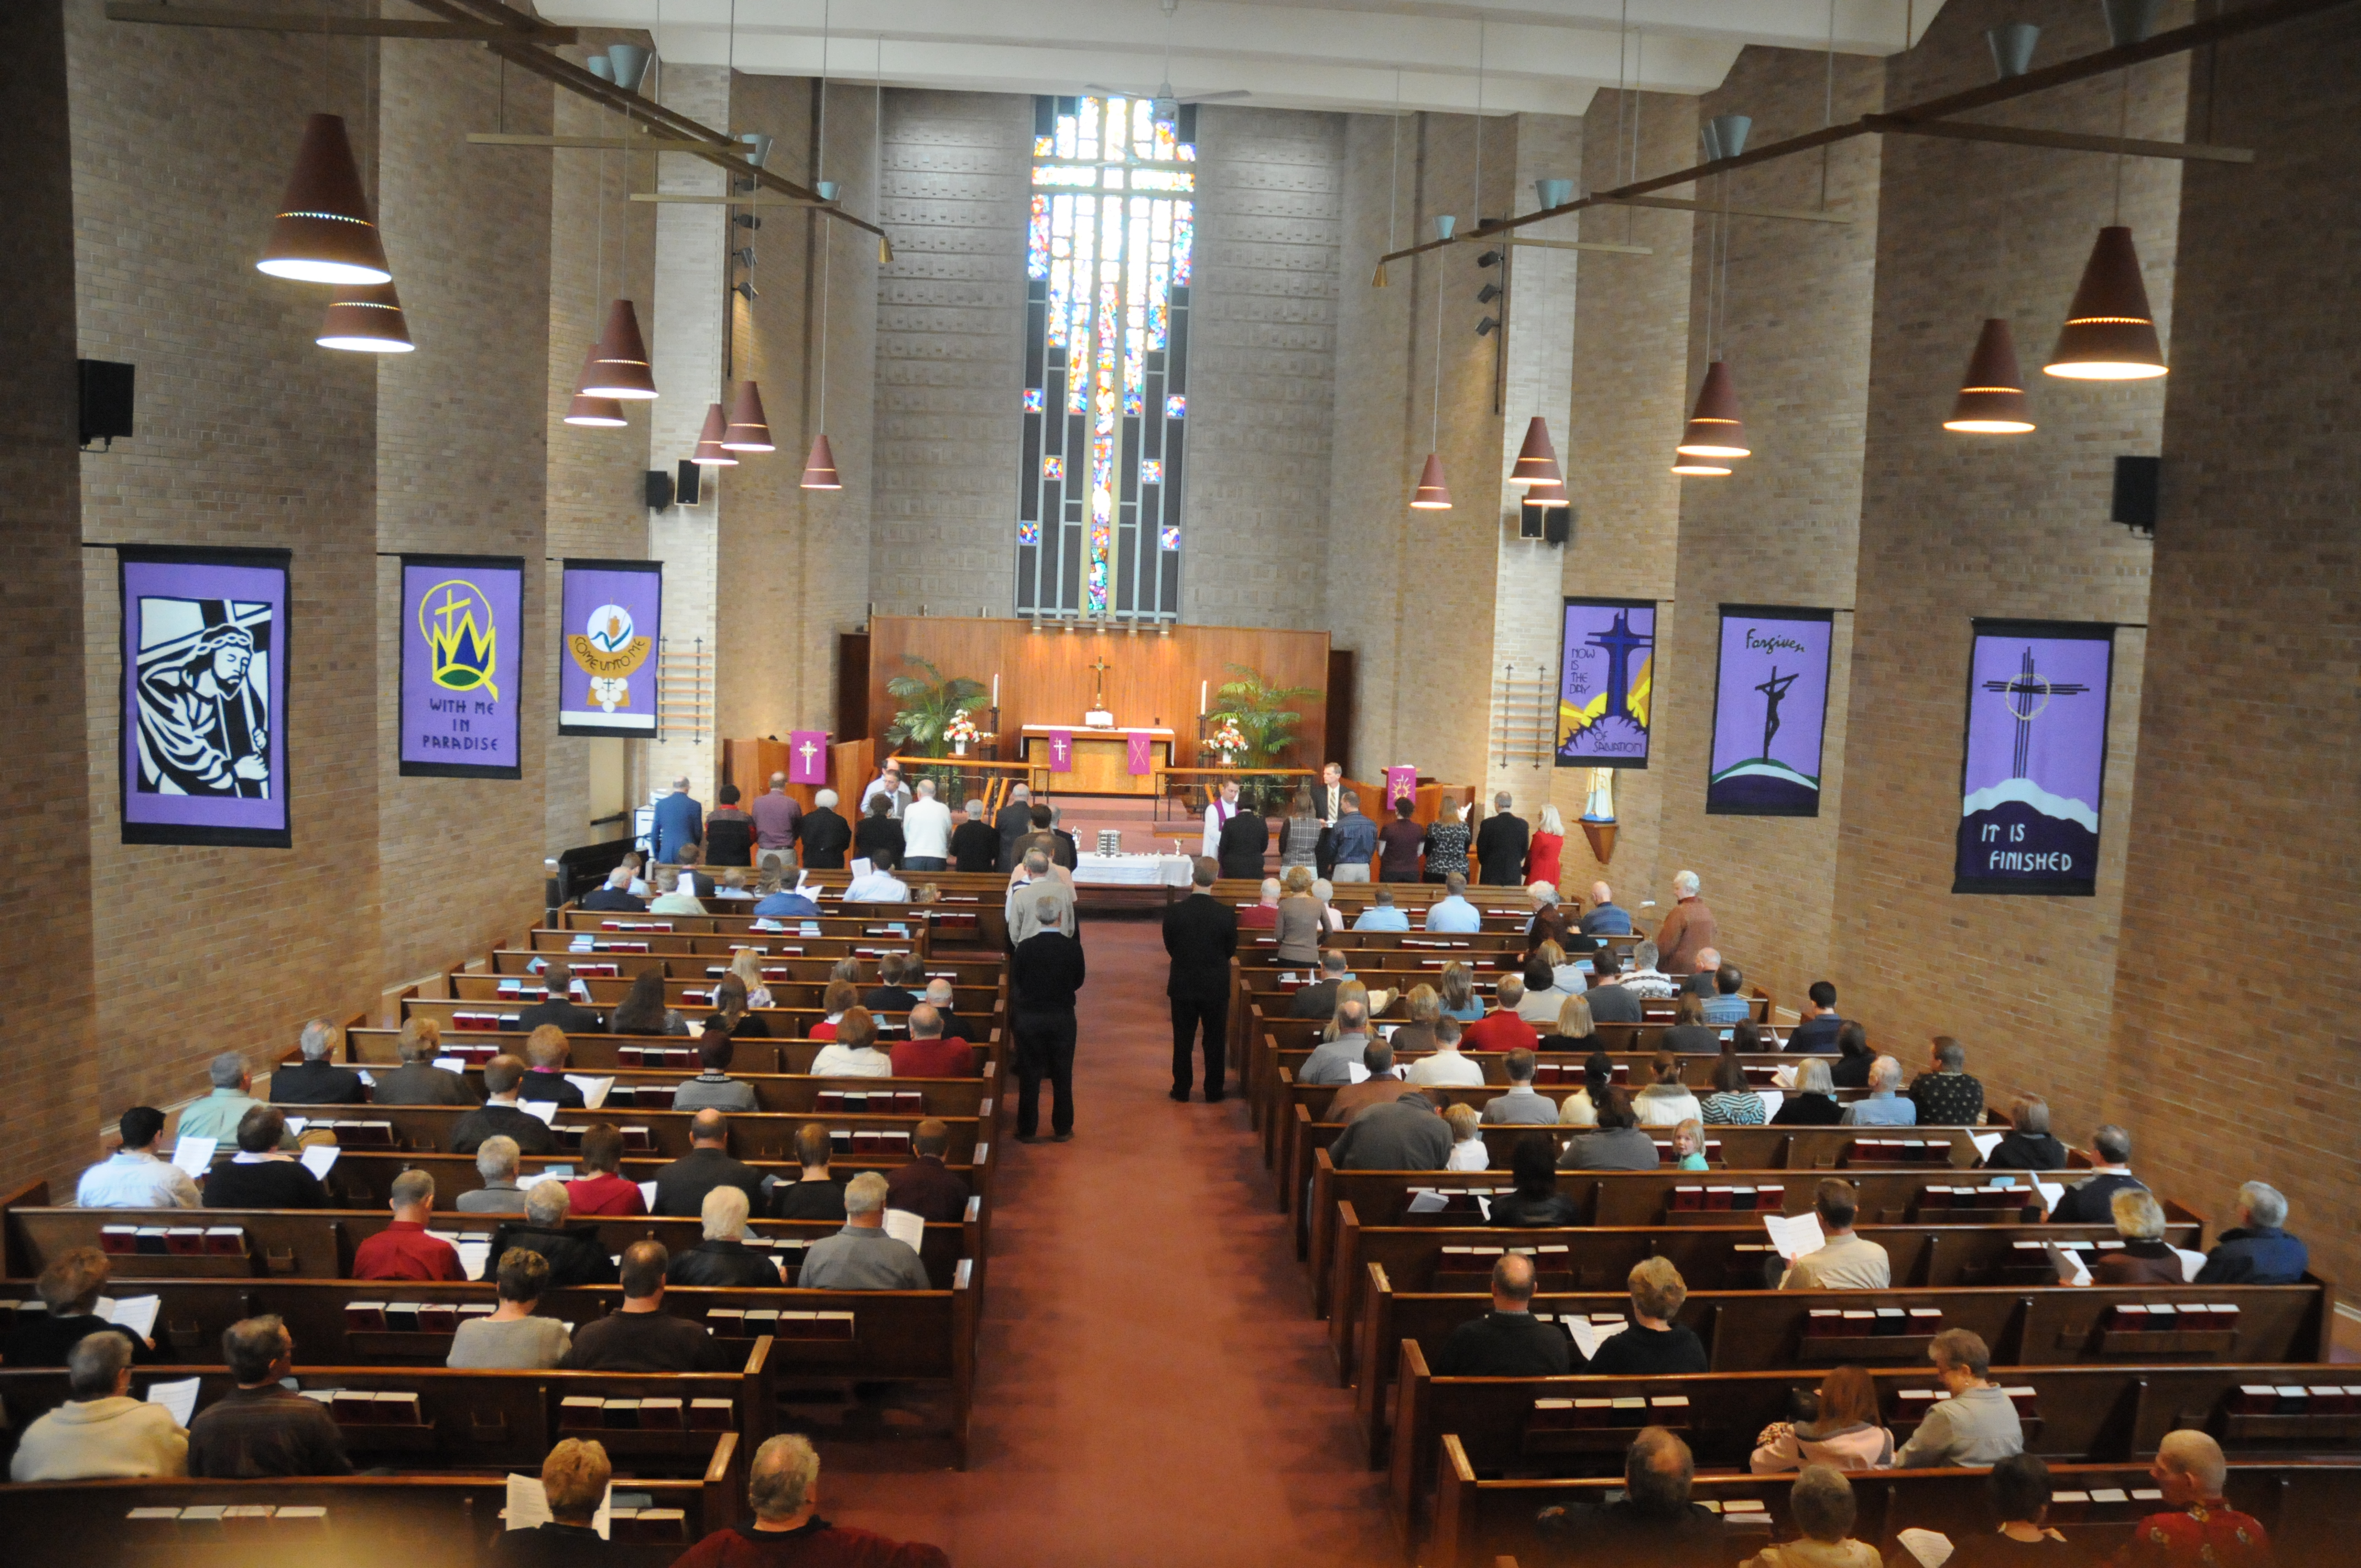 Communion during worship in North Saint Paul with Lenten banners